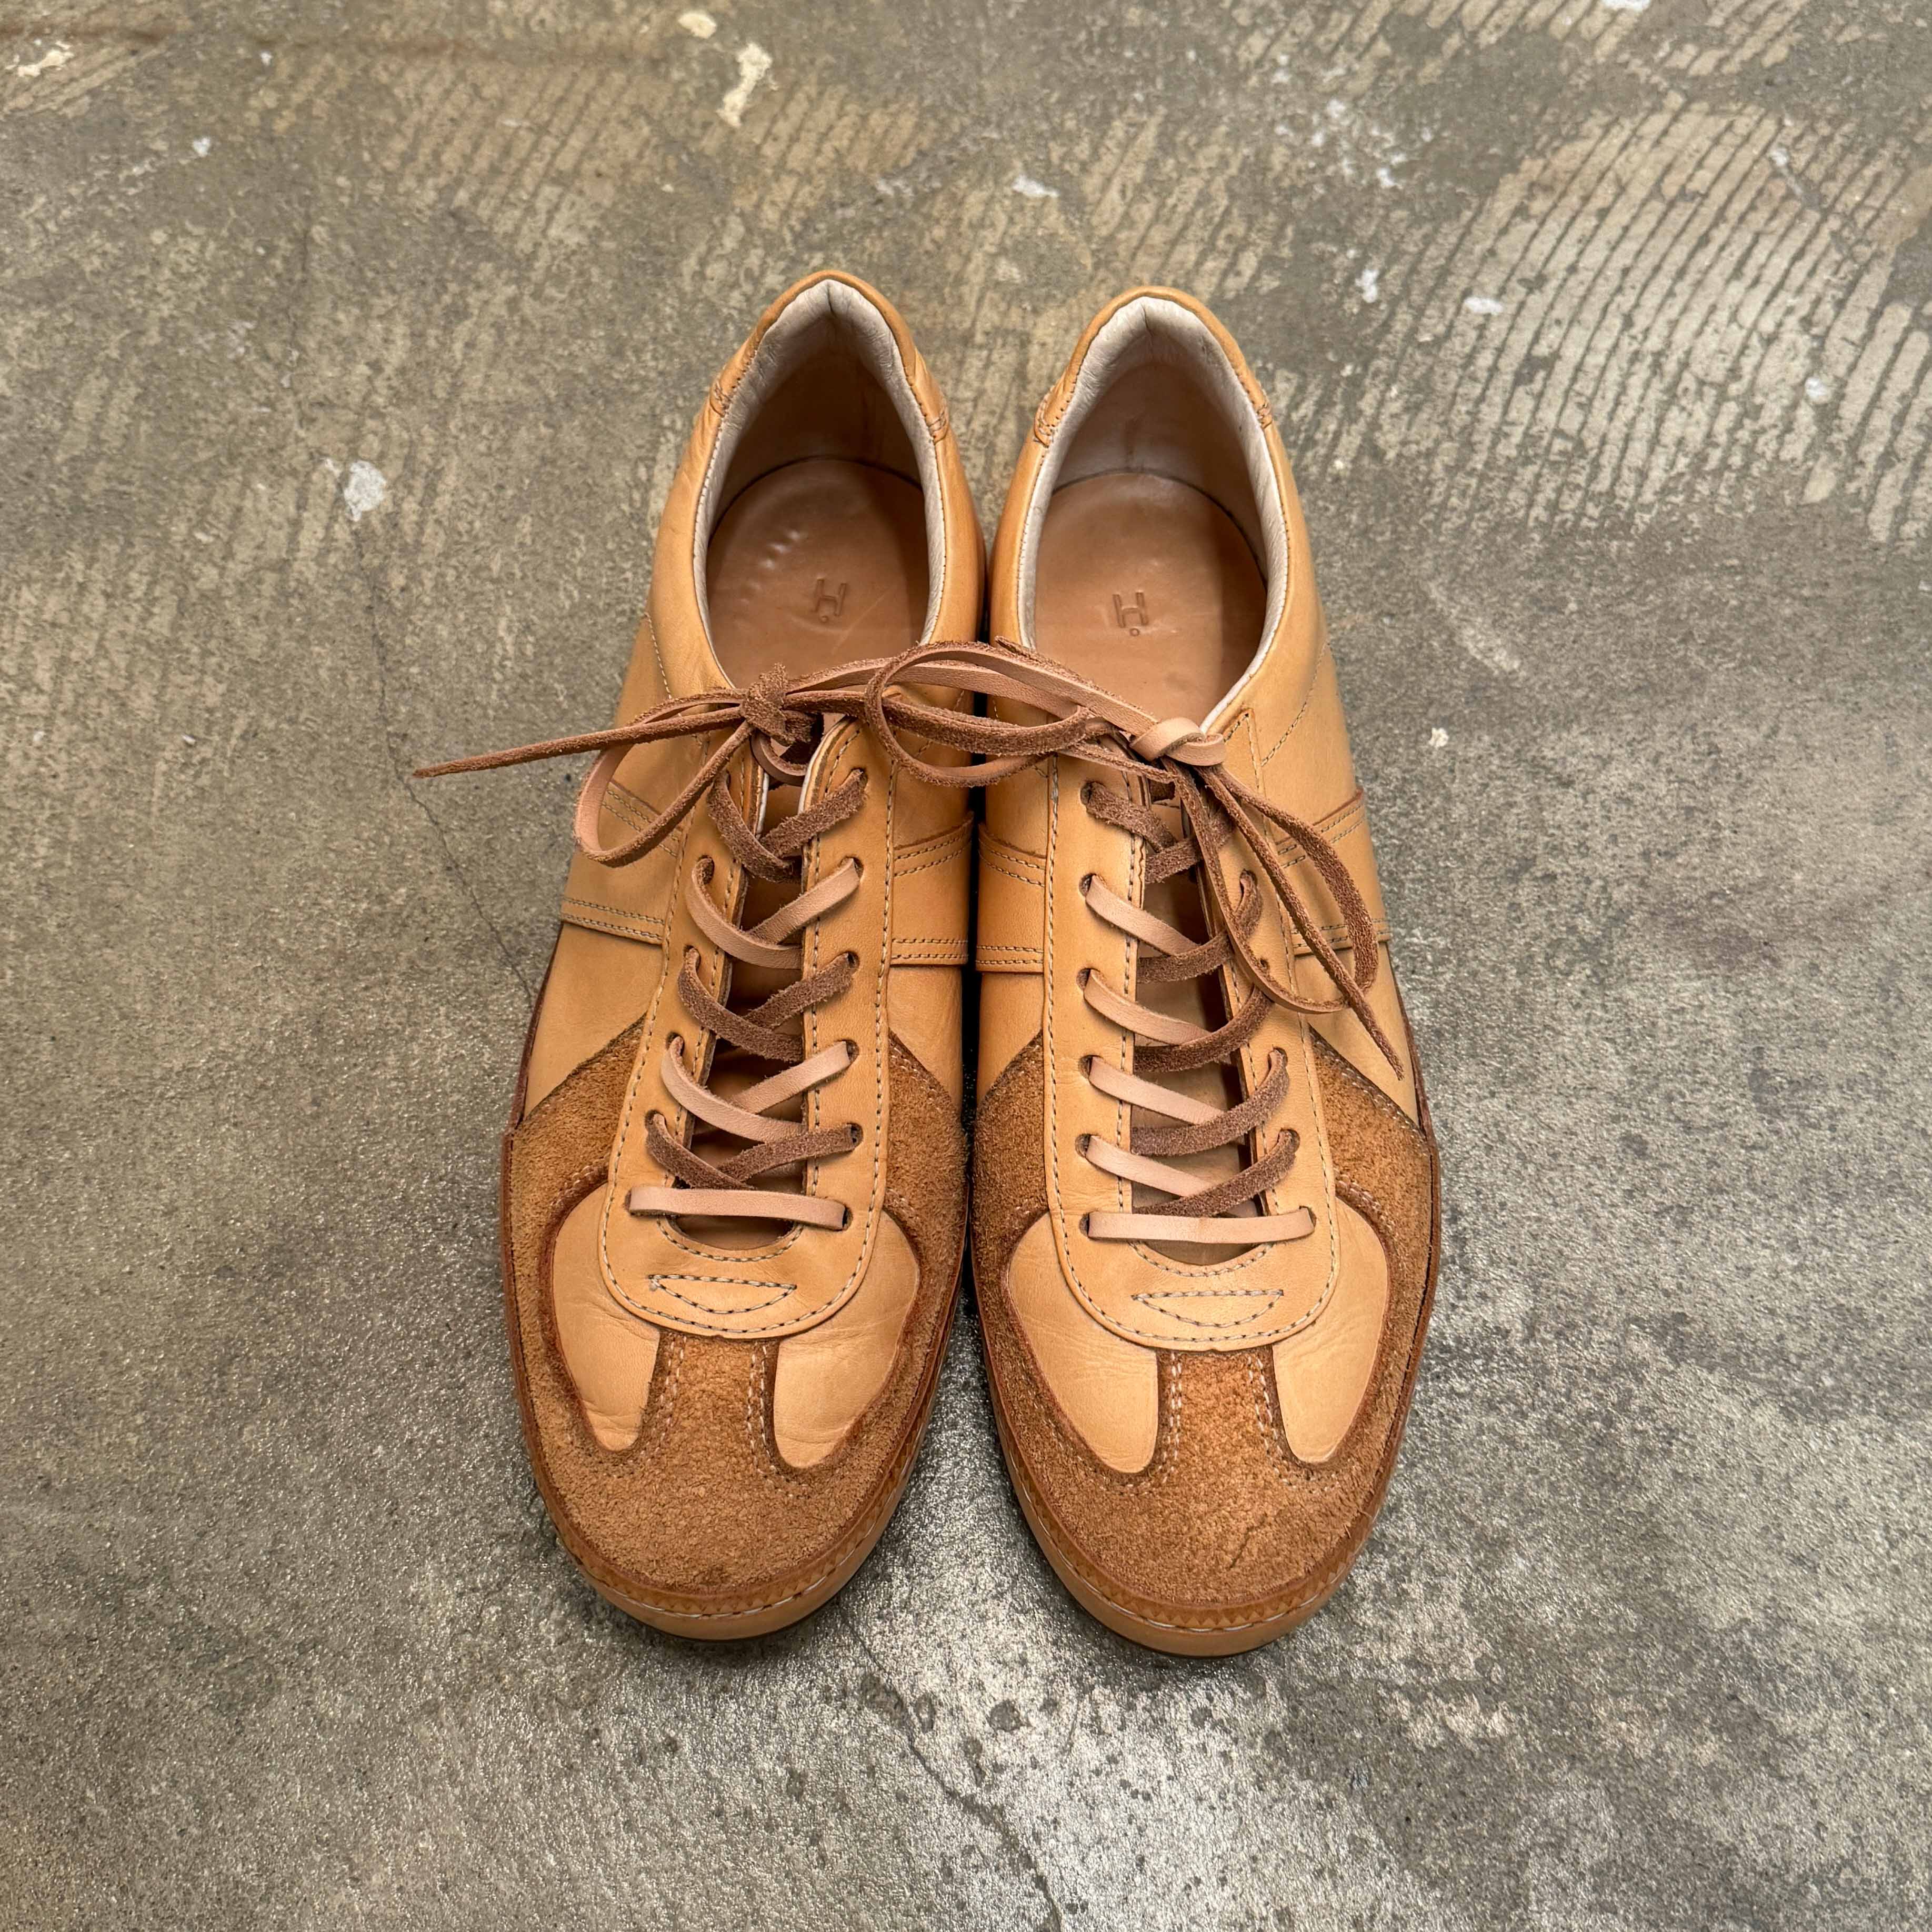 HENDER SCHEME MANUAL INDUSTRIAL PRODUCTS 05 - NATURAL